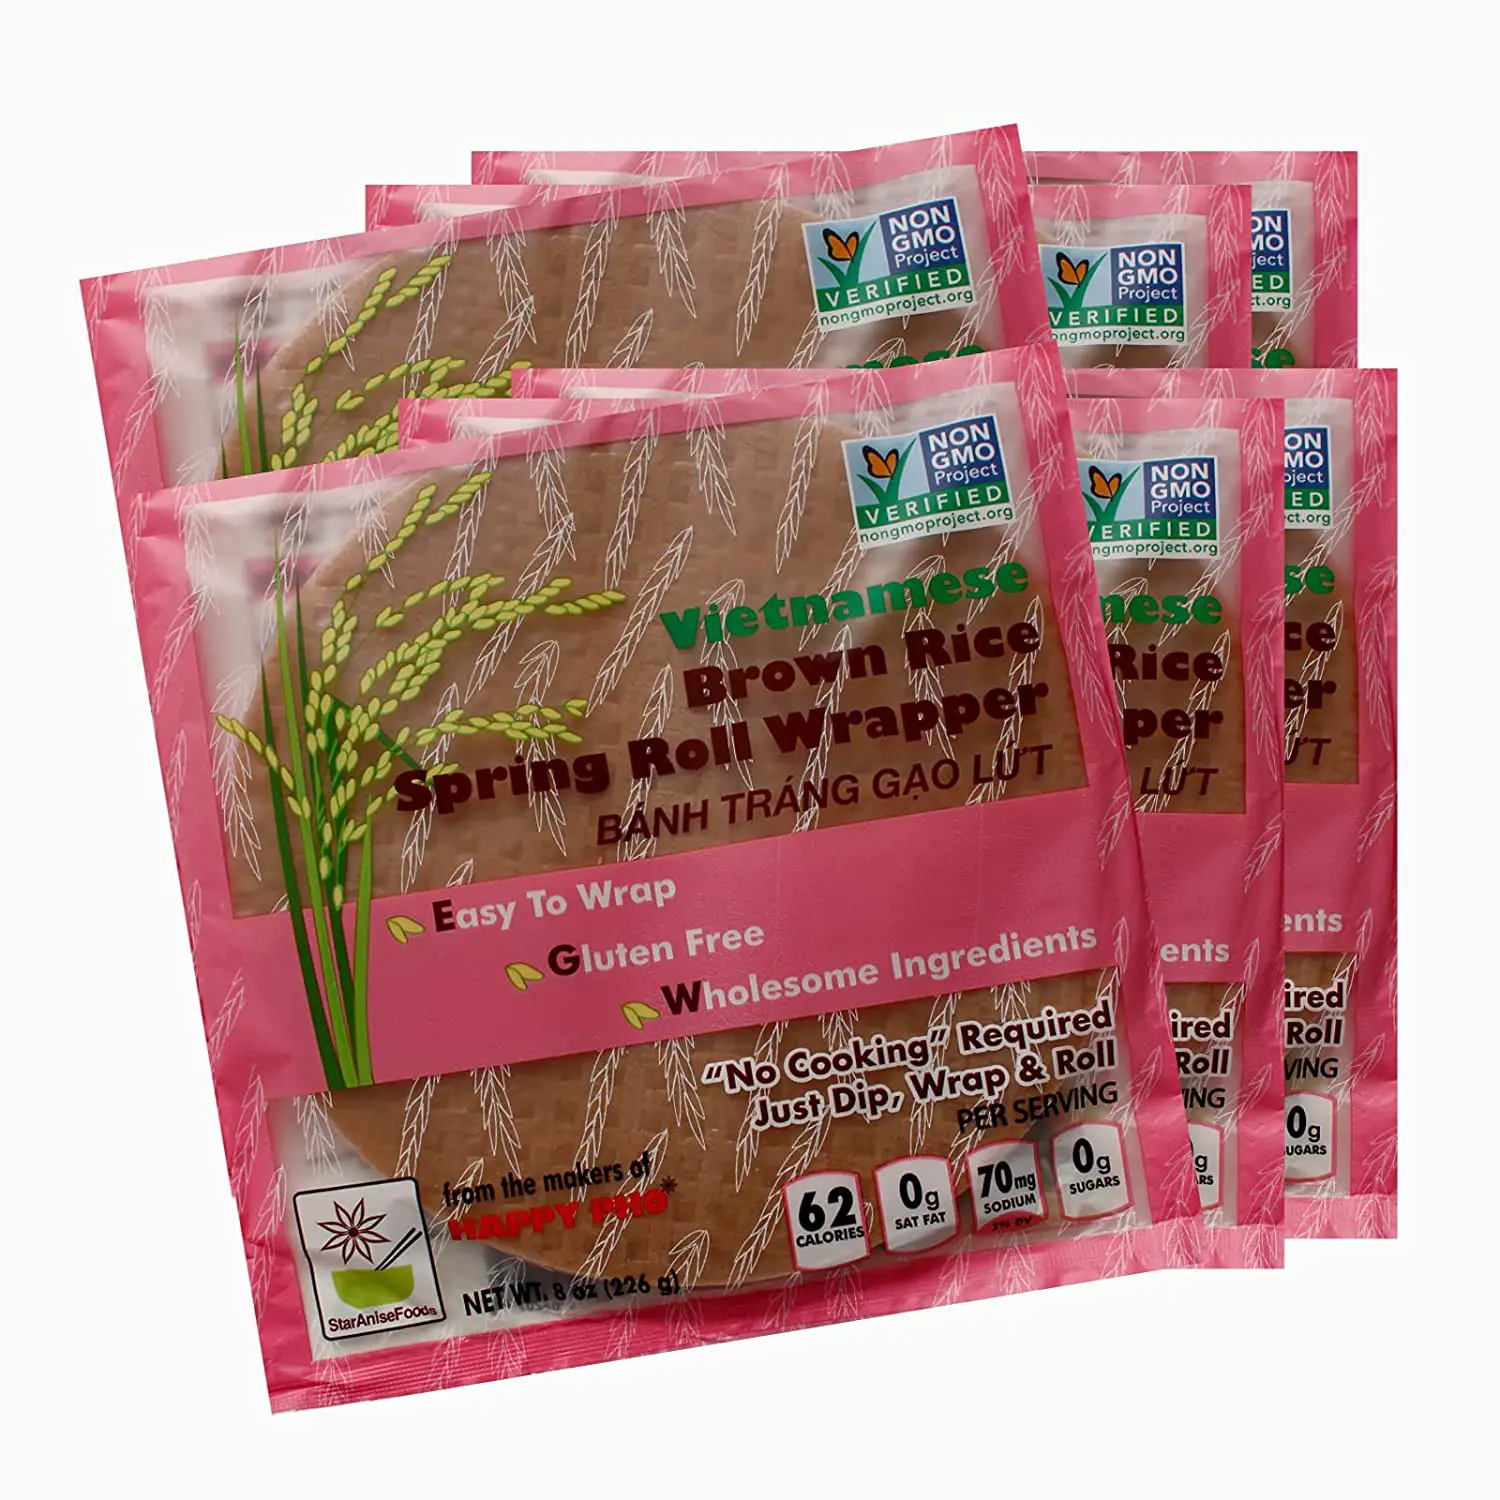 Amazon.com : Star Anise Foods Gluten Free Rice Paper Wrappers for ...